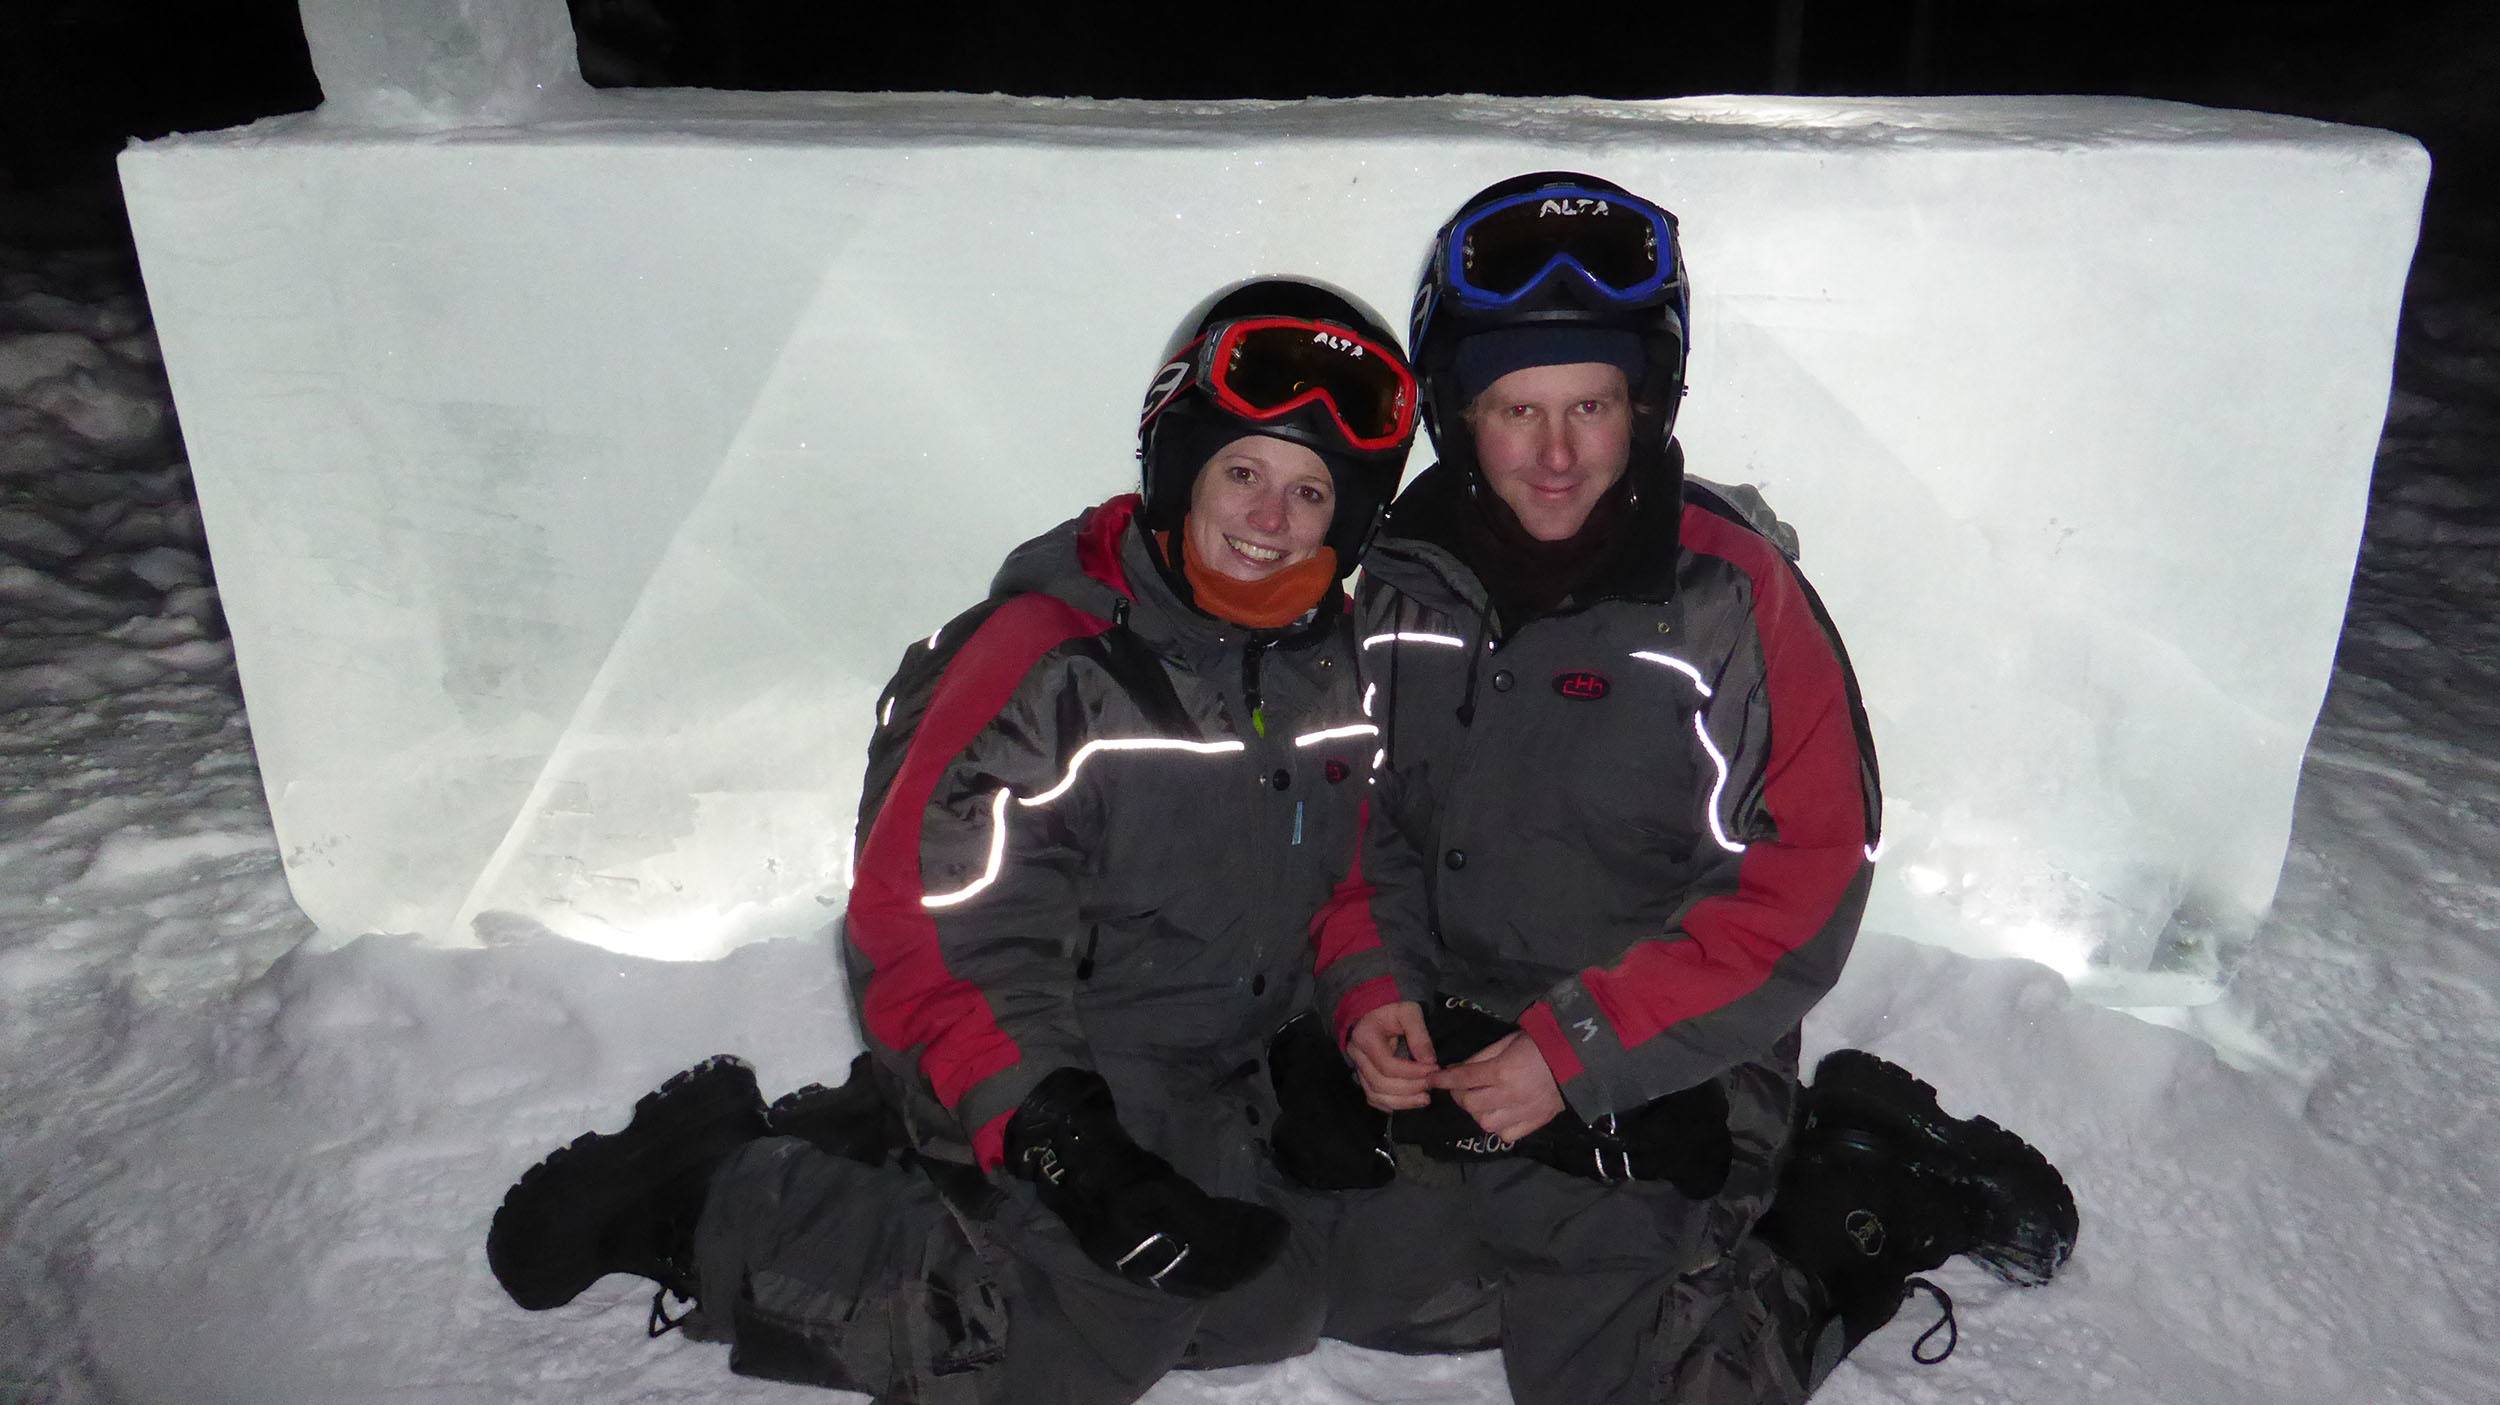 Kylie and Ben posing in front of a large block of ice at the Ice Hotel in Sweden